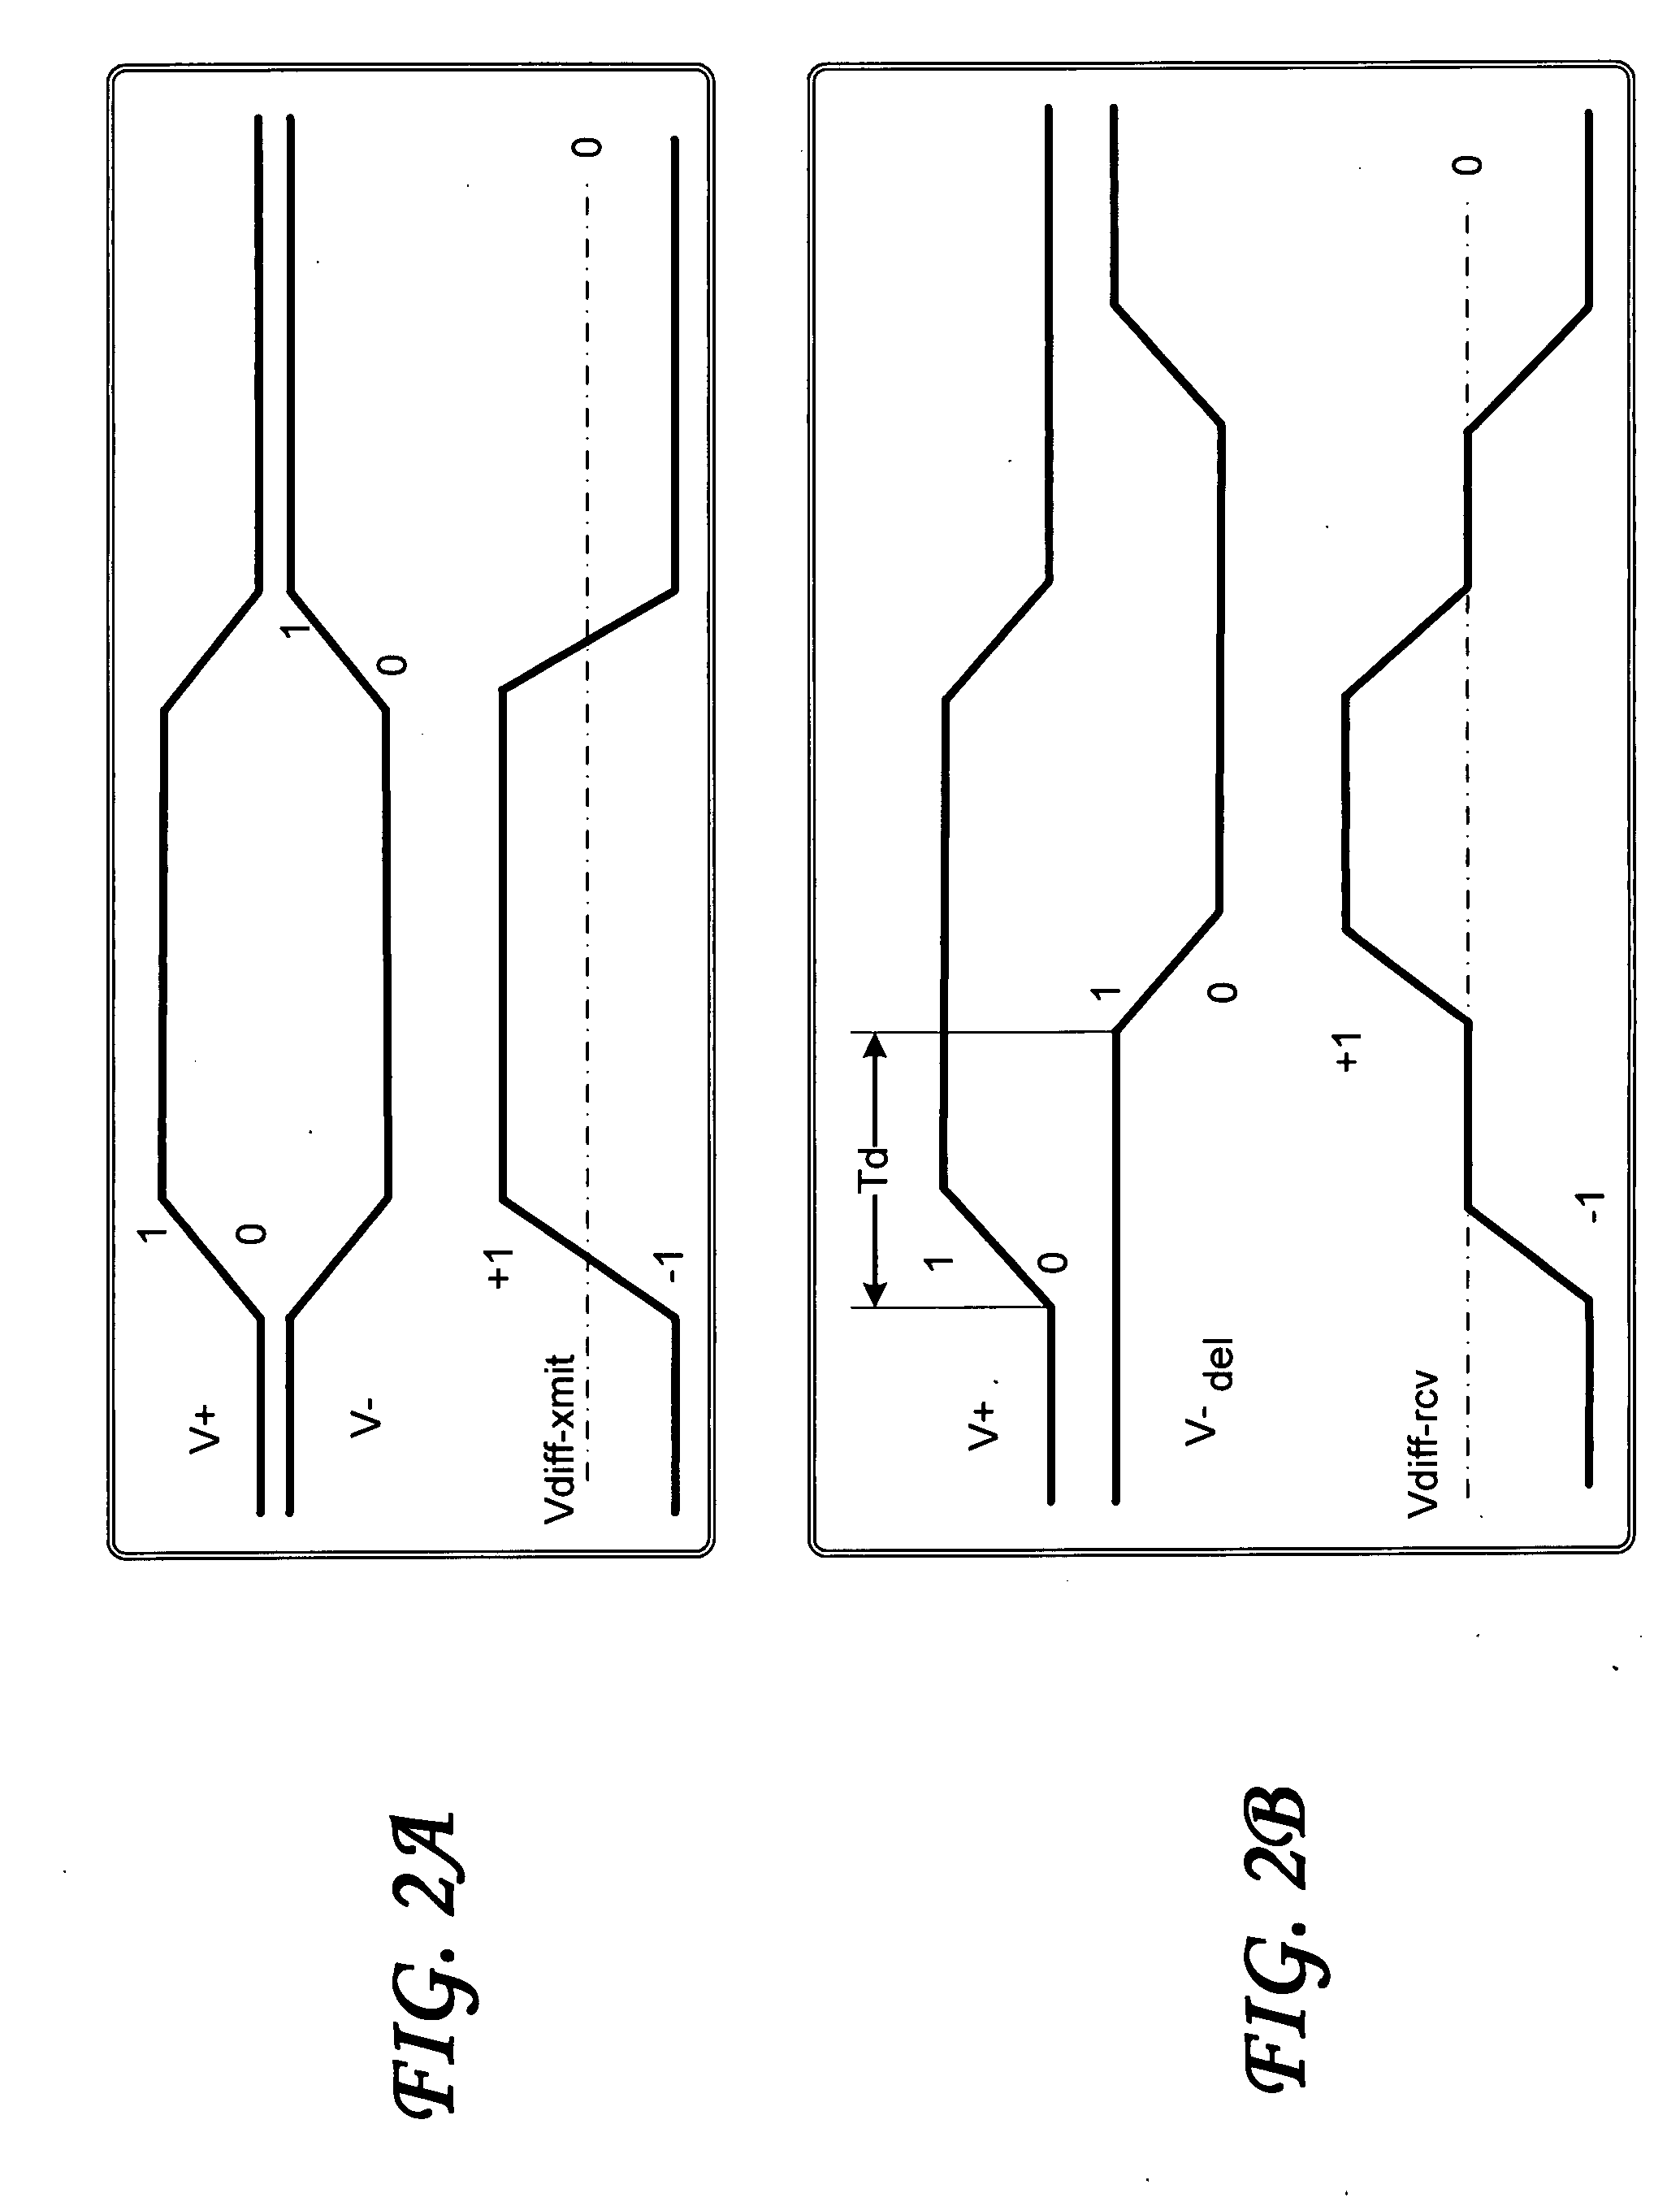 High-speed cable with embedded power control